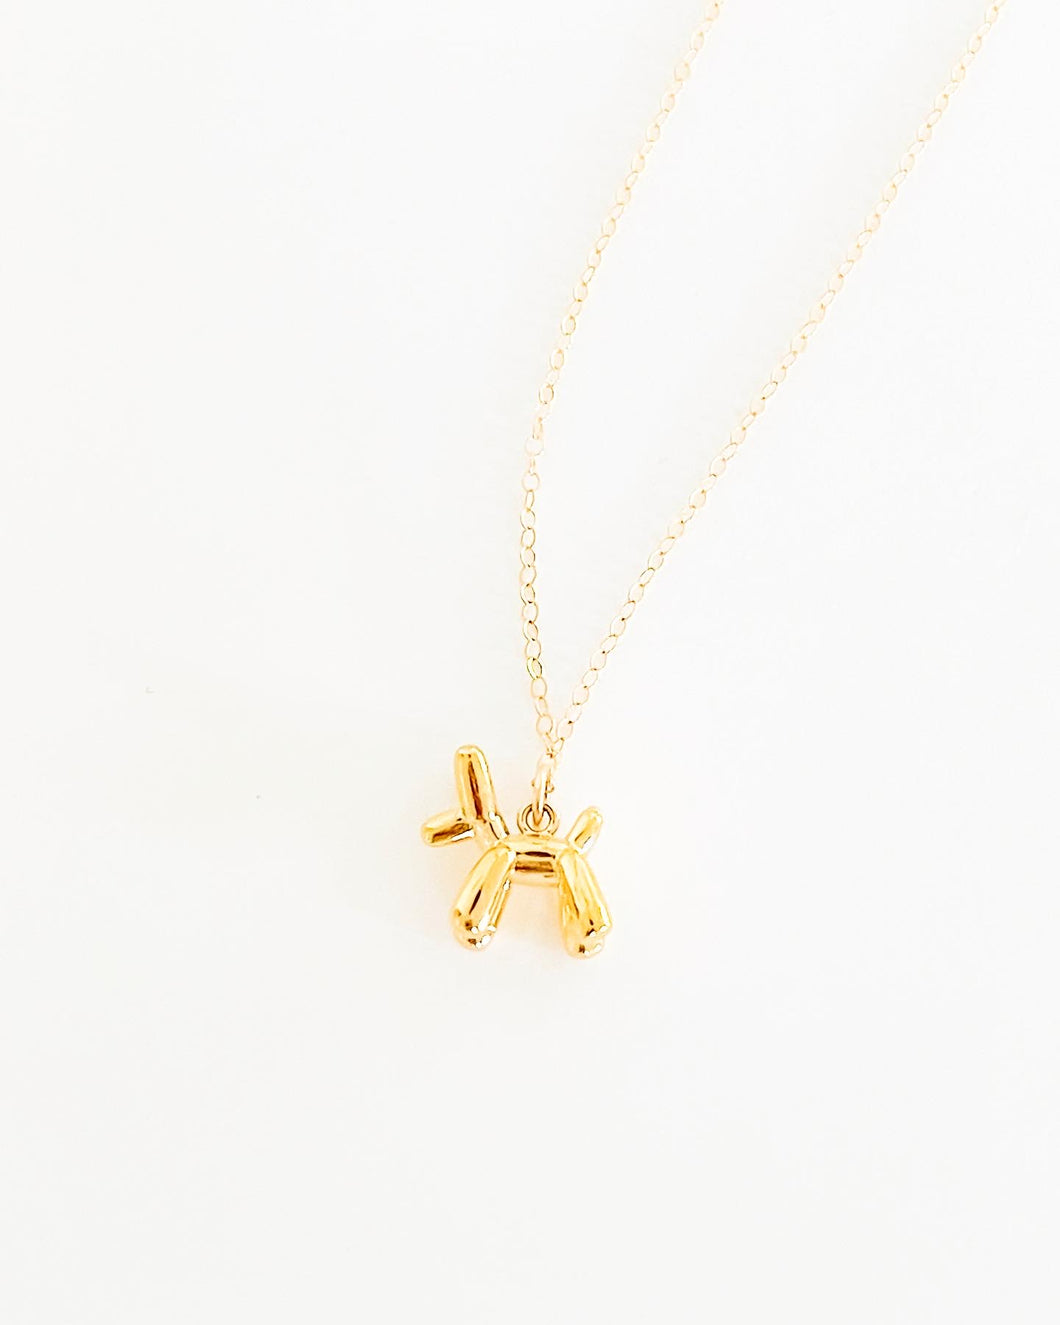 The Balloon Dog Charm Necklace